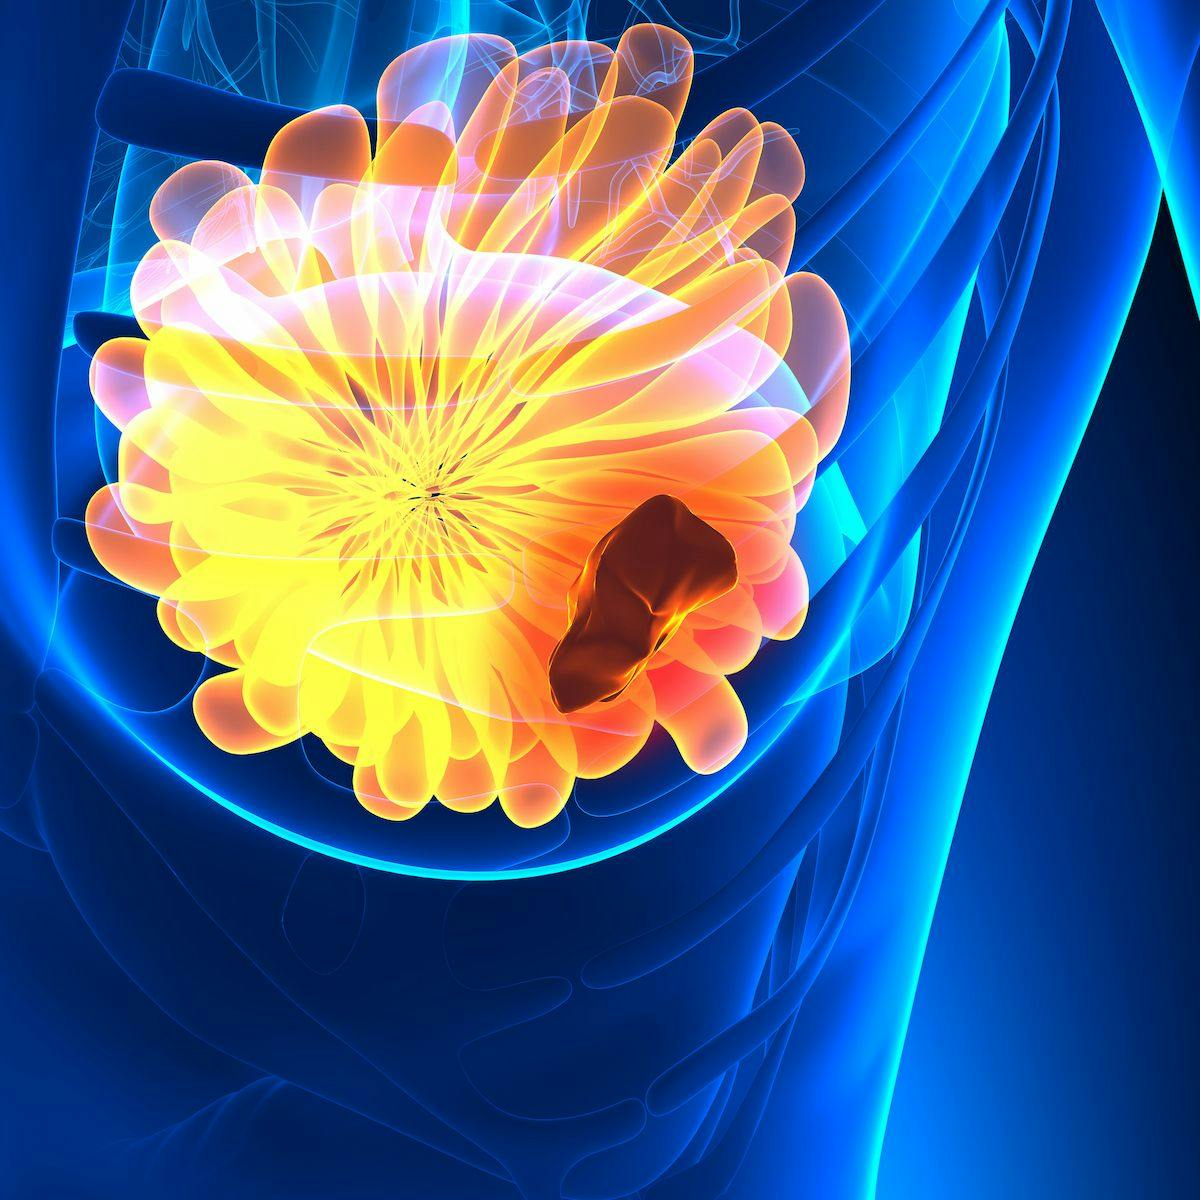 Findings from the SqeDCIS trial indicated that DCISionRT was predictive of radiotherapy benefit in patients with ductal carcinoma in situ of the breast.